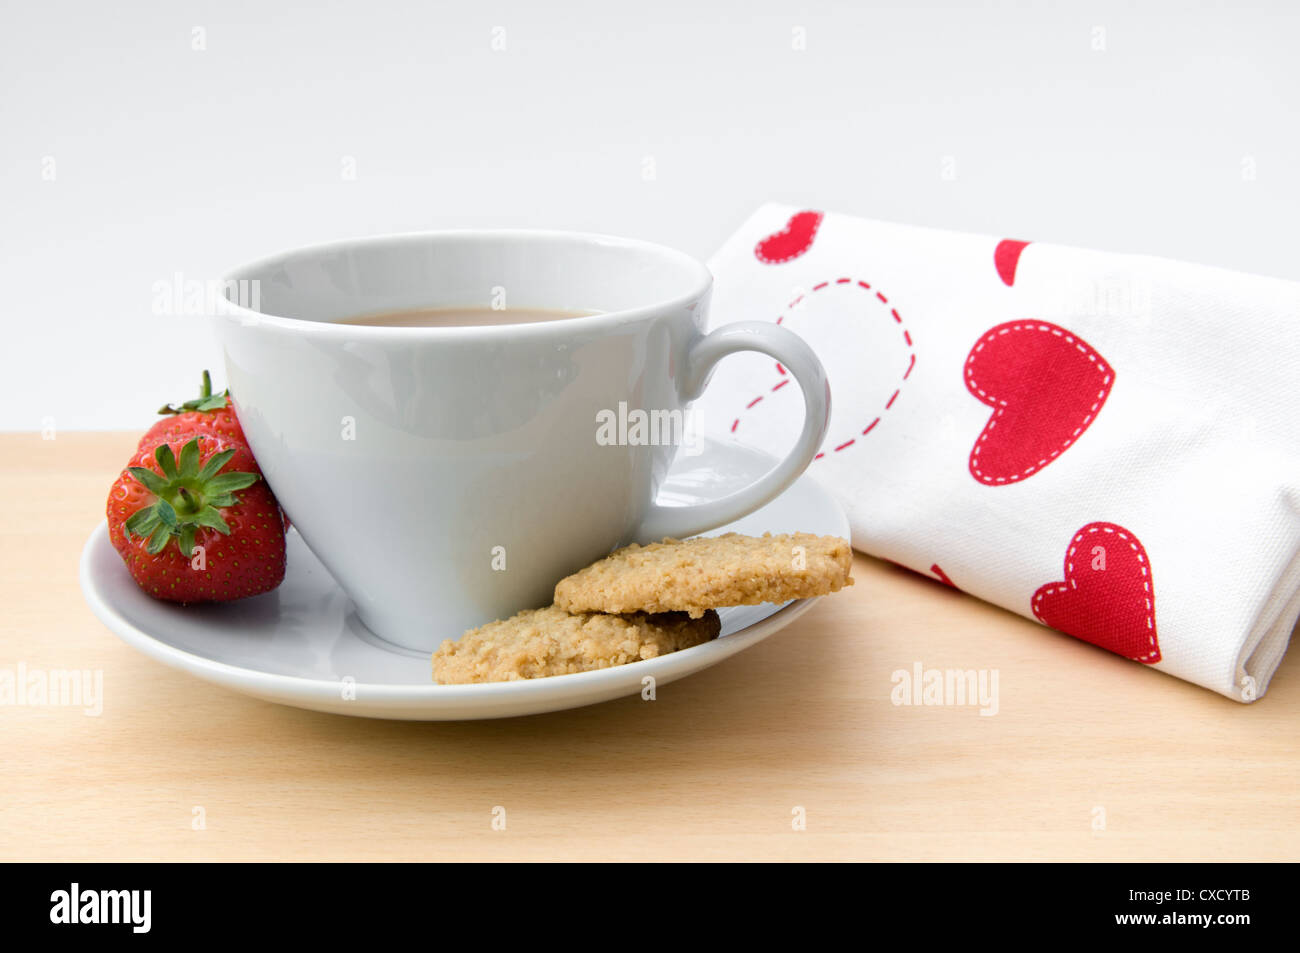 Cup of tea with strawberries and biscuits on the side with red and white napkin on table top Stock Photo